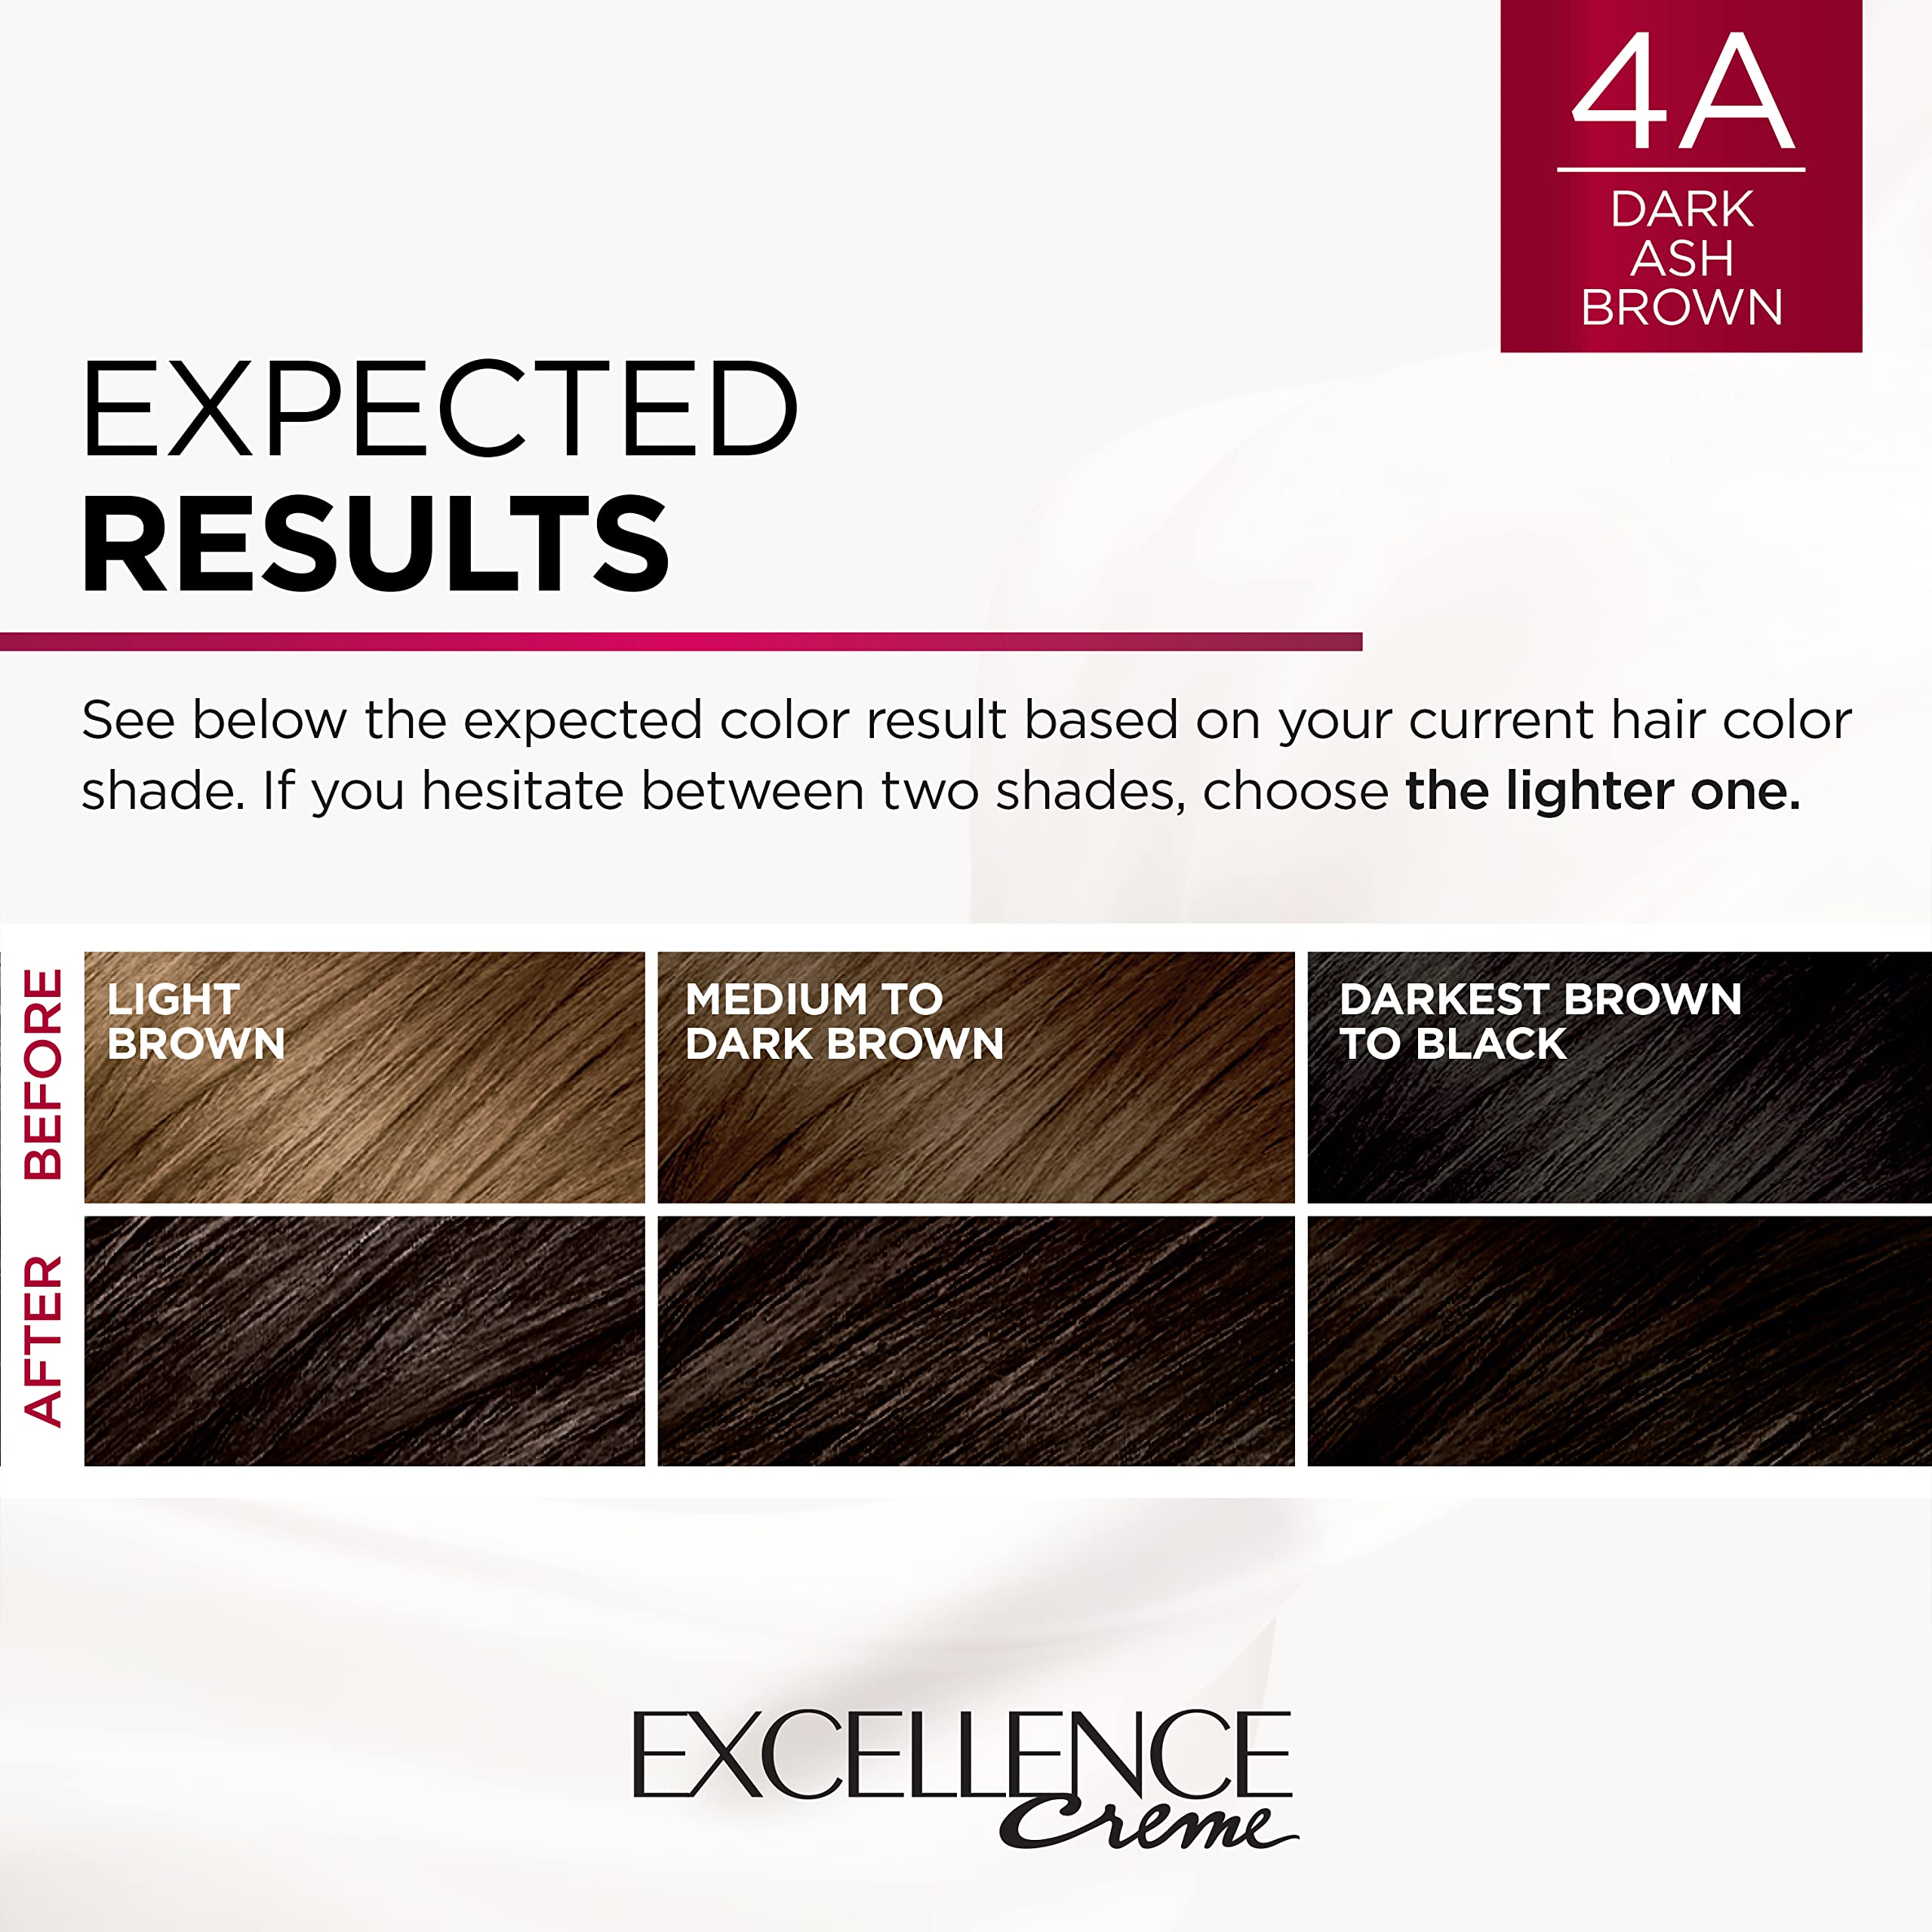 L'Oreal Paris Excellence Creme Permanent Triple Care Hair Color, 4A Dark Ash Brown, Gray Coverage For Up to 8 Weeks, All Hair Types, Pack of 1